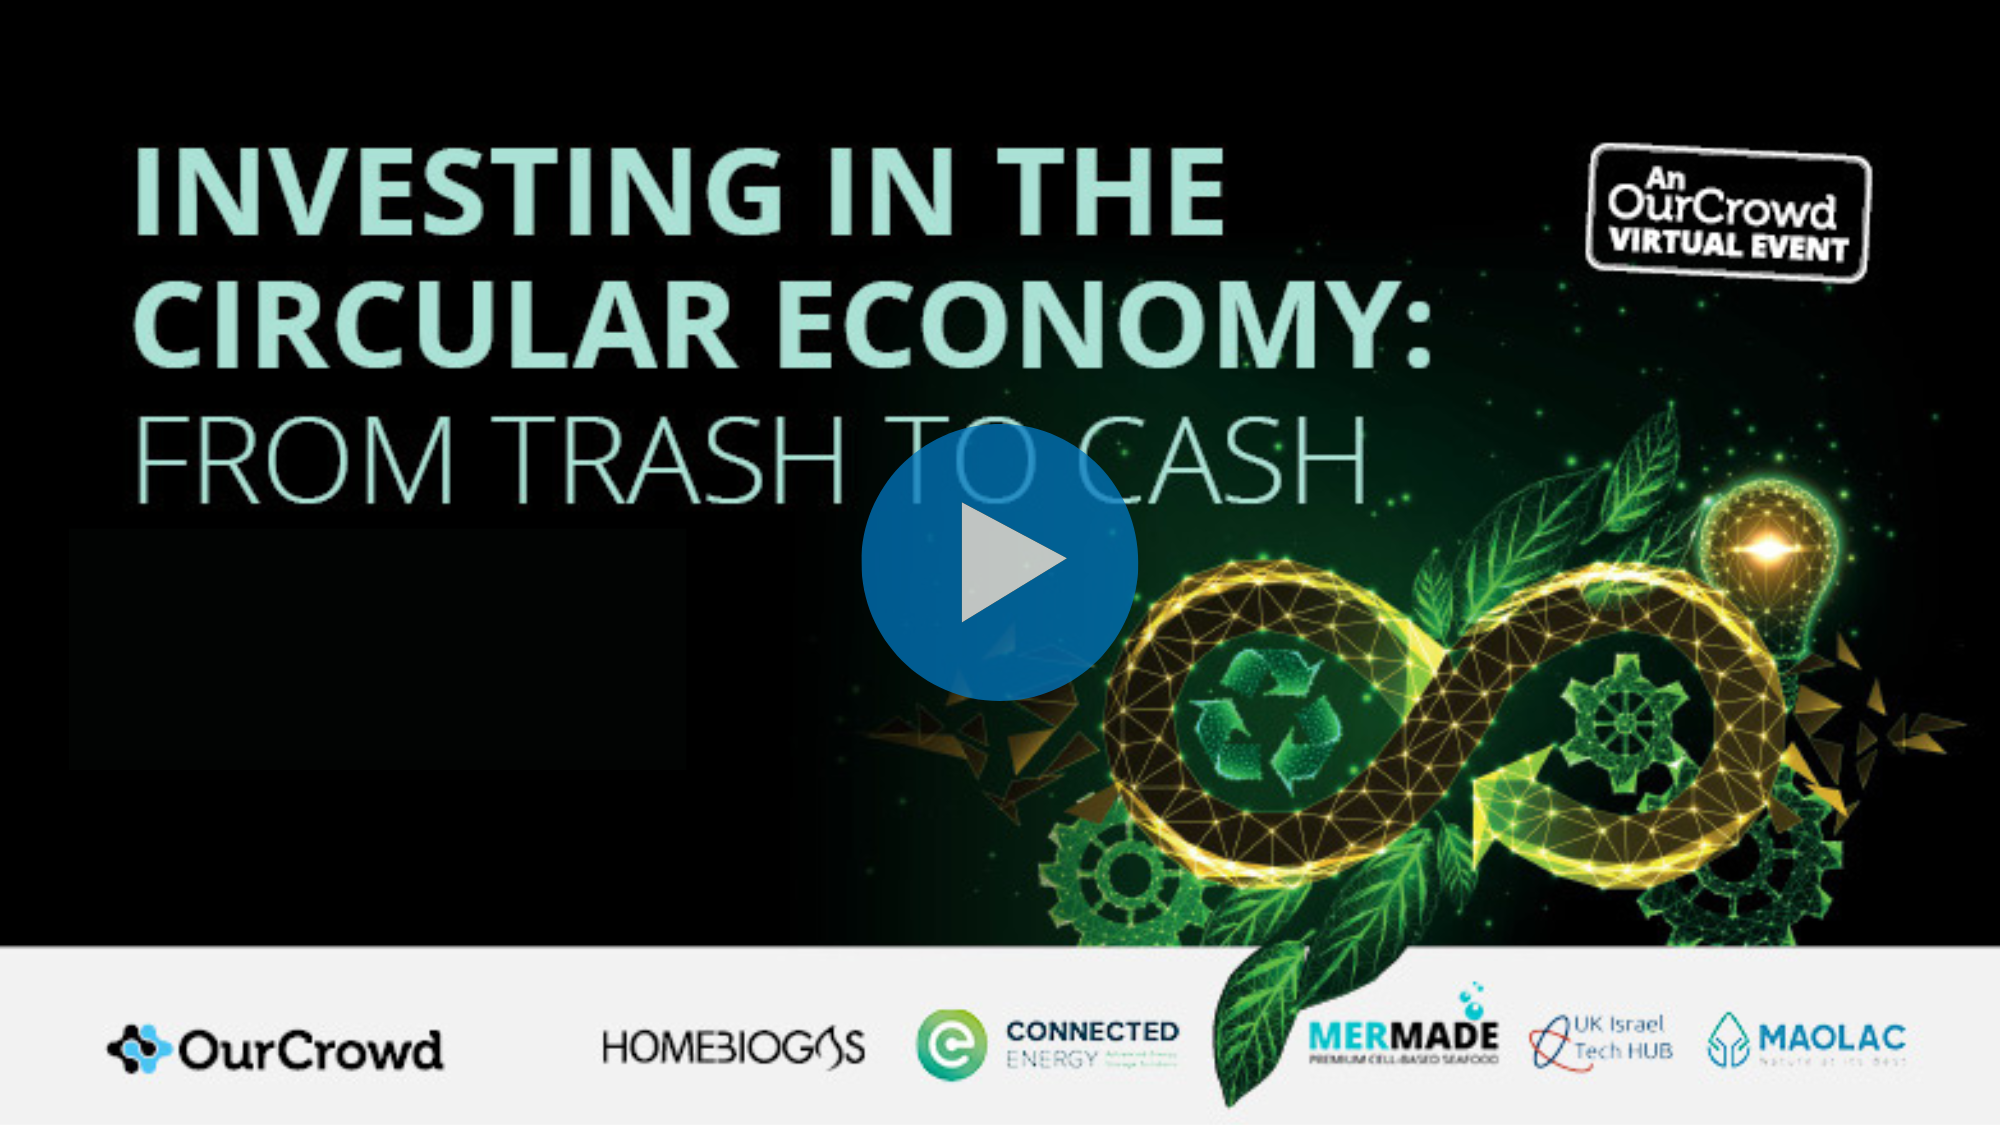 Circular Economy investment opportunity